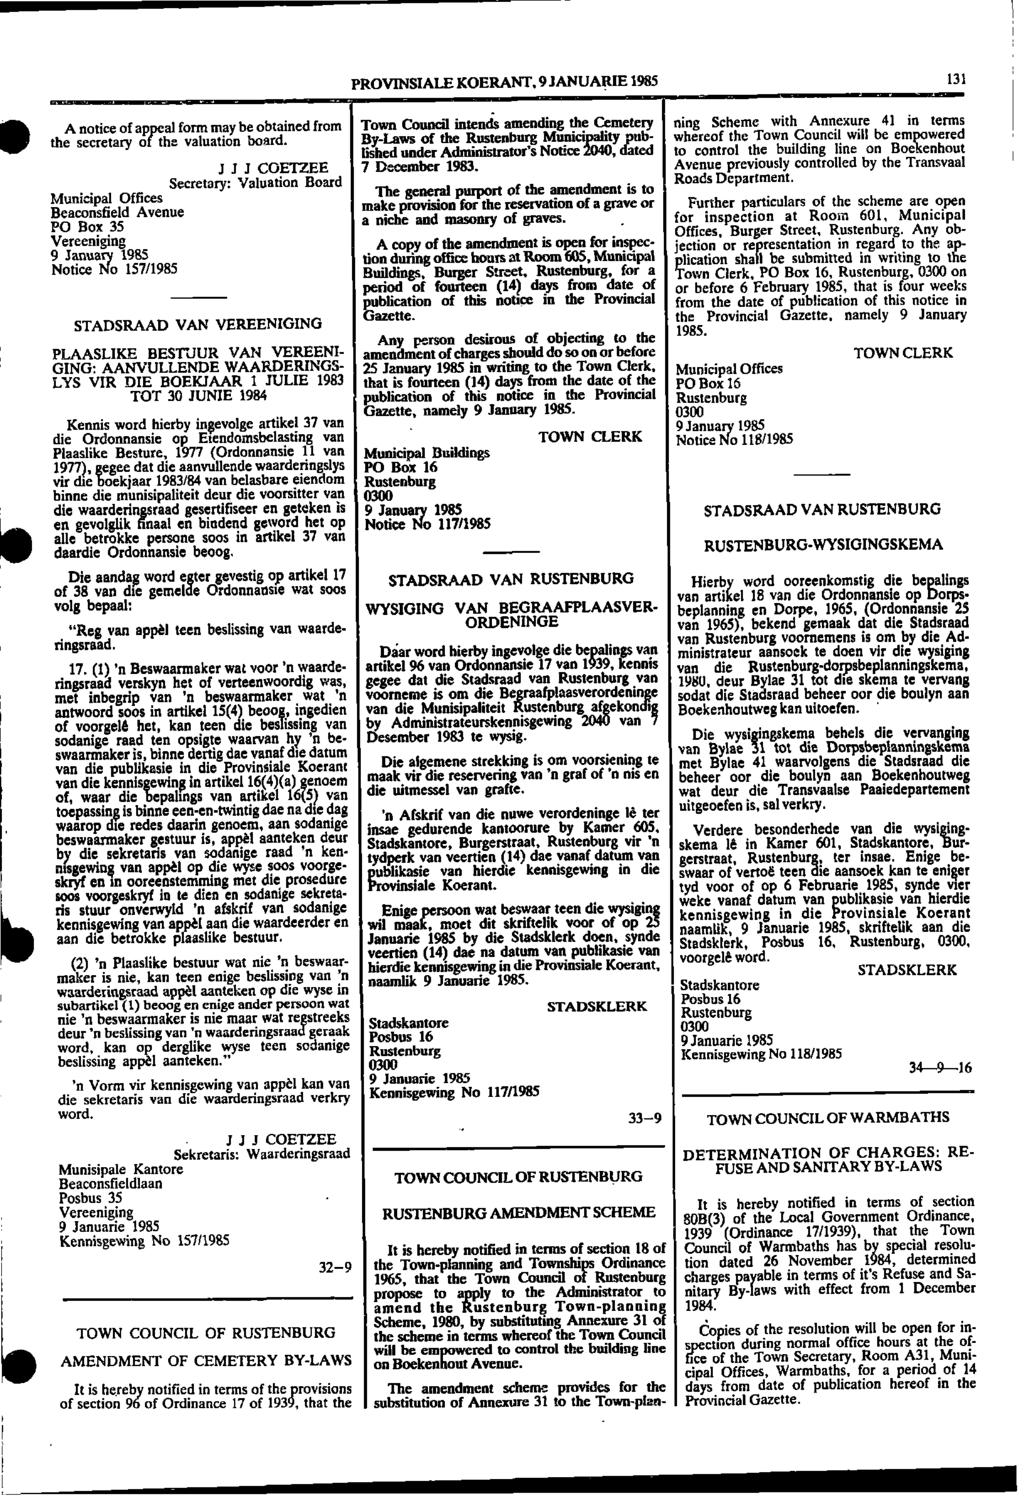 1 skryf, waarderingsraad 1 It 1 1 a PROVINSIALE KOERANT, 9 JANUARIE 1985 131 A notice of appeal form may be obtained from Town Council intends amending the Cemetery ning Scheme with Annexure 41 in